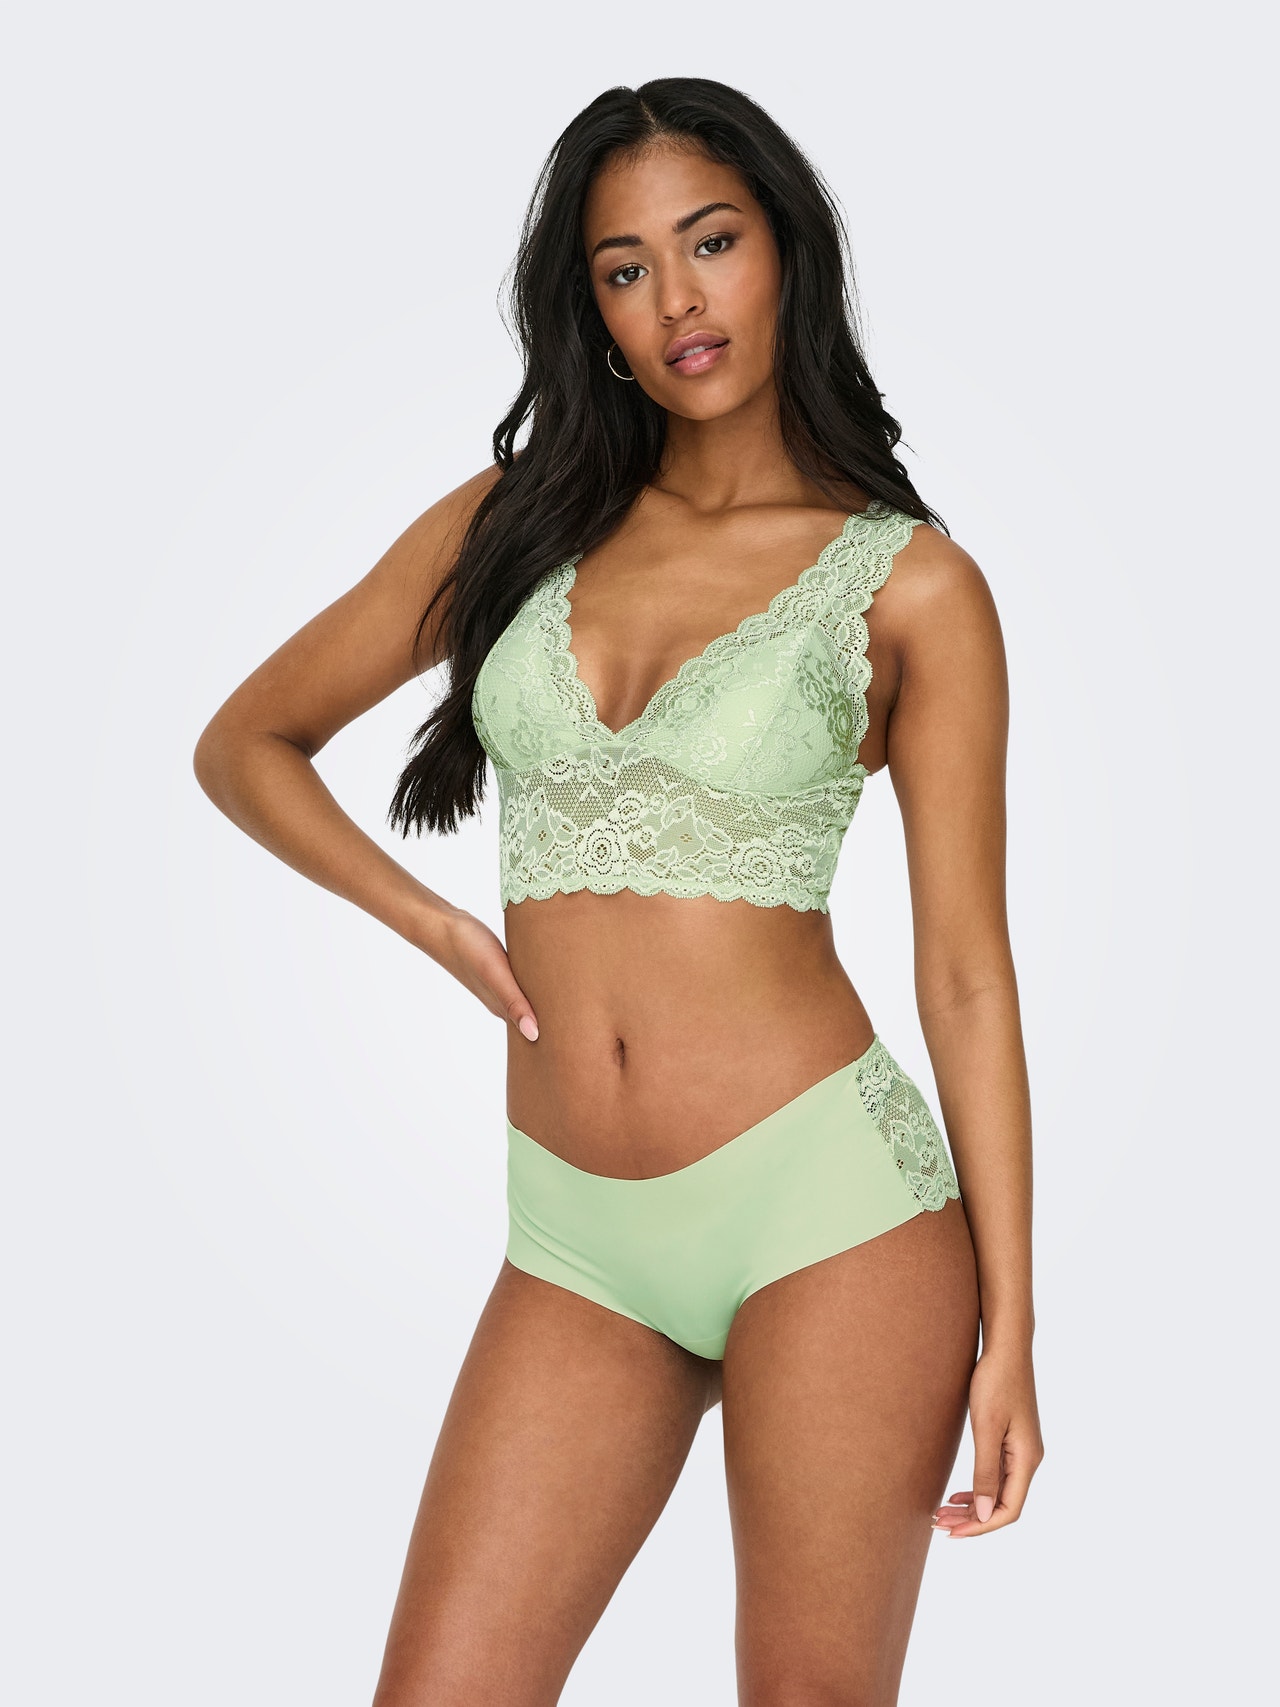 ONLY Lace Bra -Subtle Green - 15107599